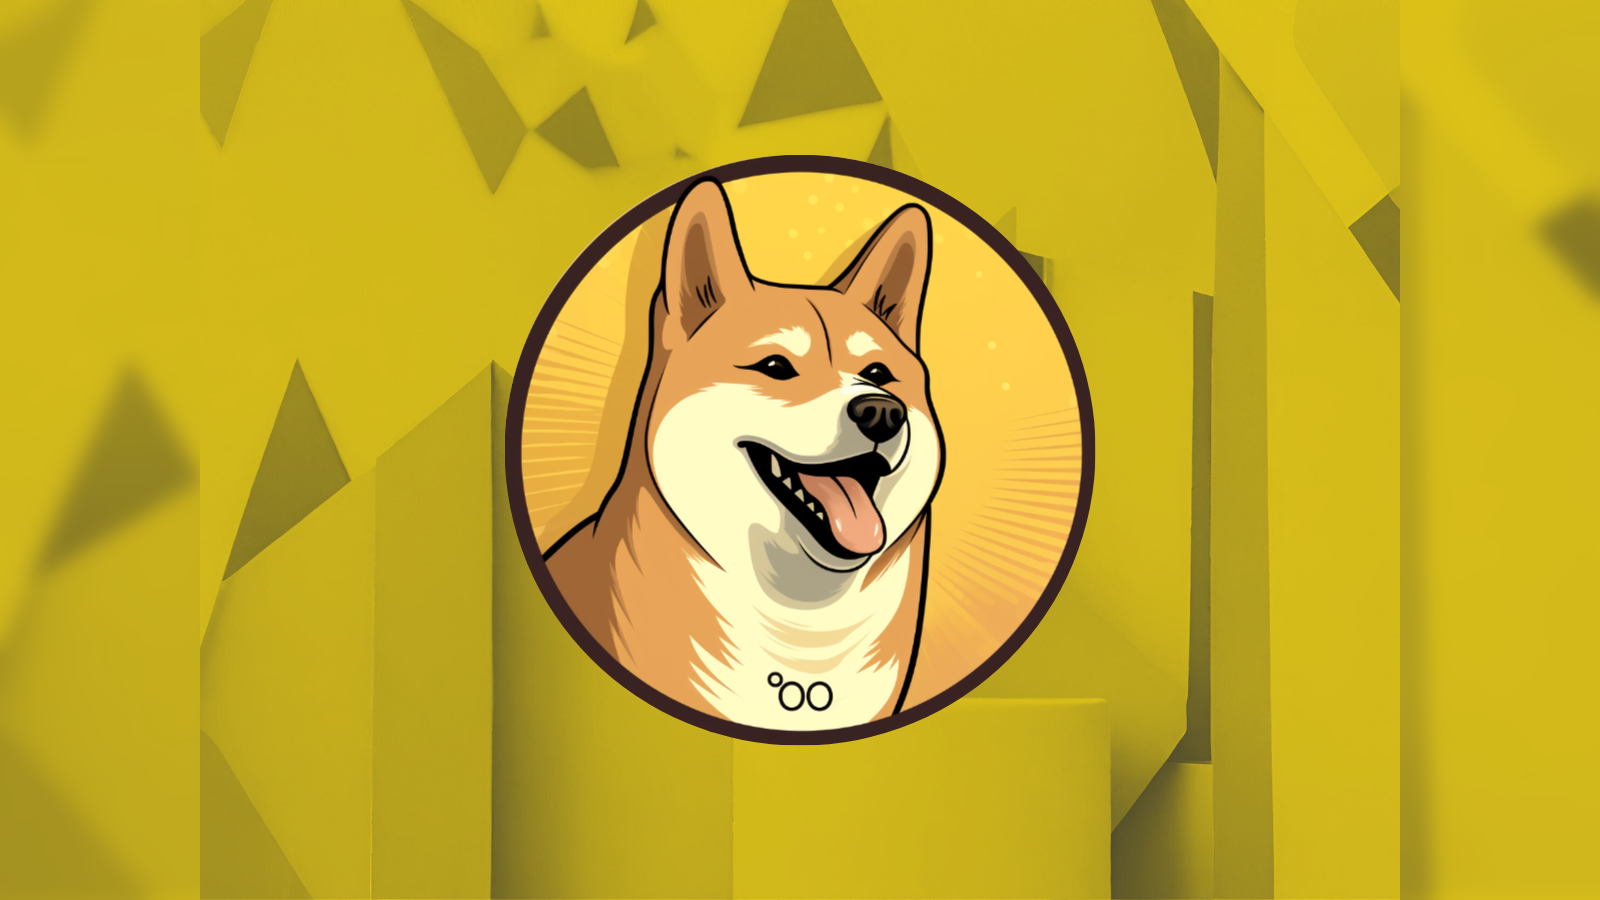 Dogecoin20: After raising $5.5M in one week, just $1M remains for $DOGE20  presale—why are traders buying big bags? - The Economic Times